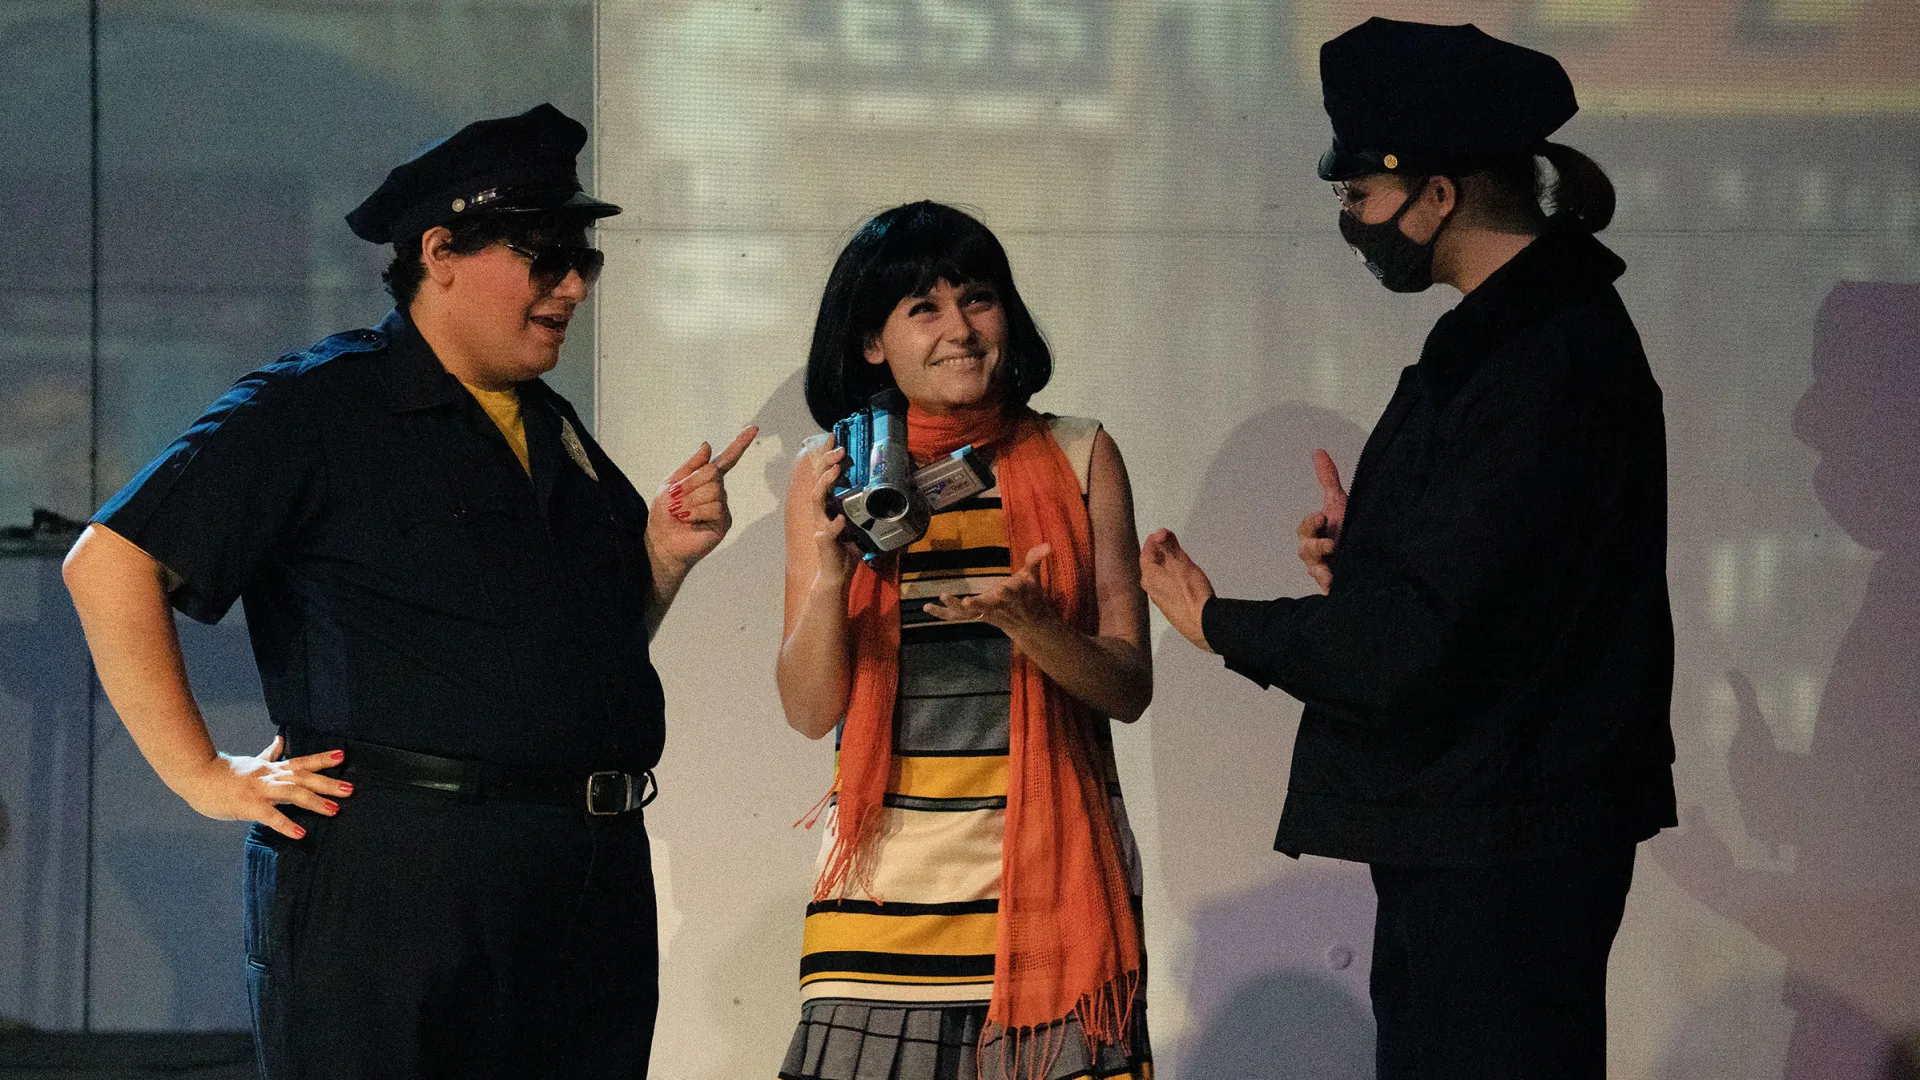 Photo from the CSUSB opera presentation of “I was looking at the ceiling and then I saw the sky.”